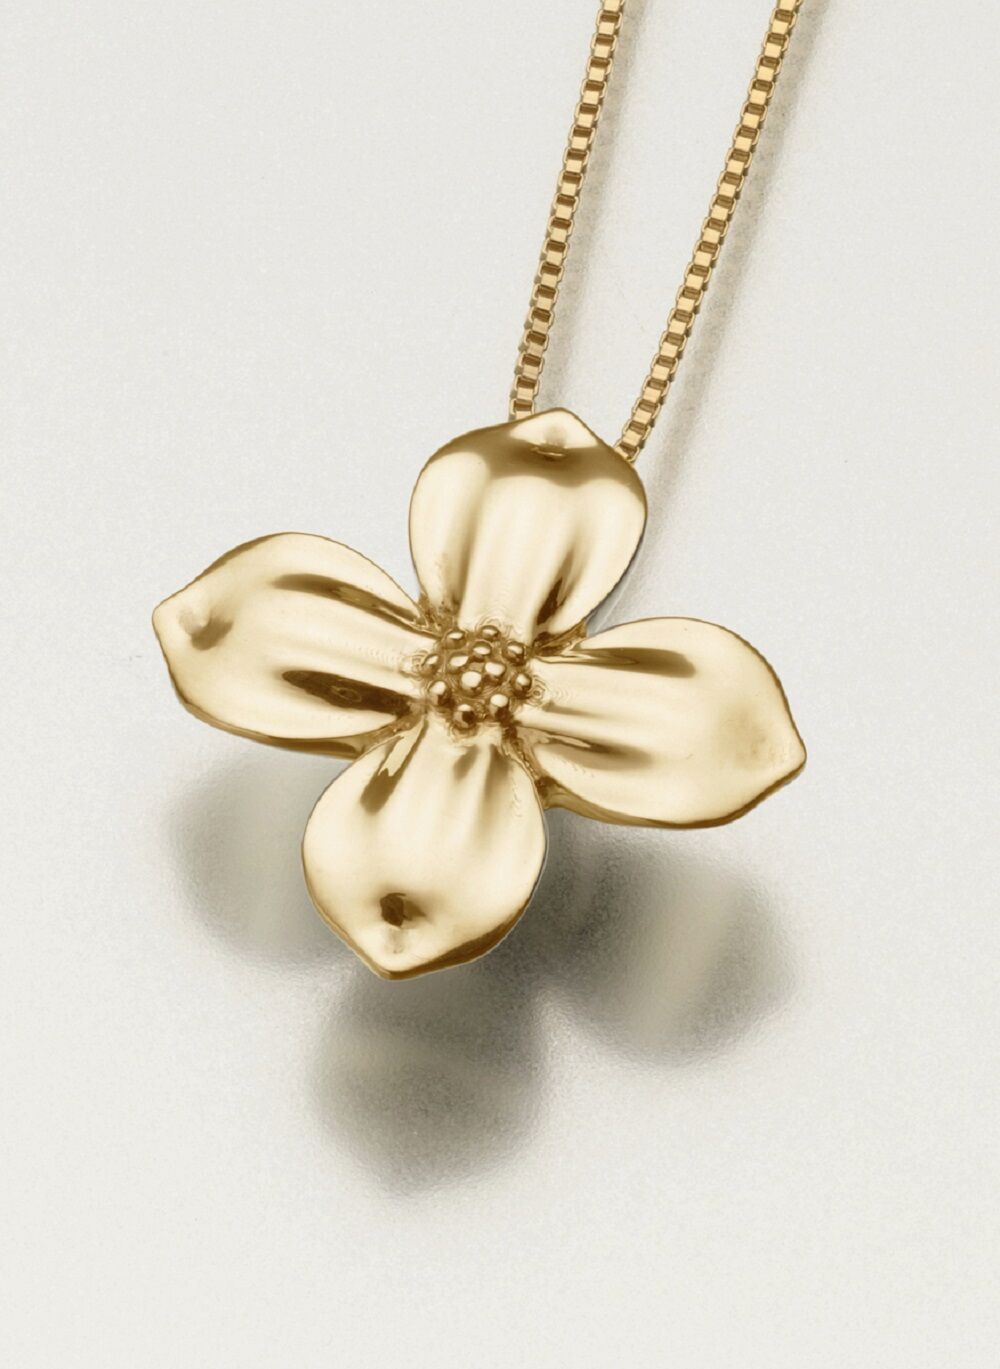 Gold Vermeil Dogwood Blossom Memorial Jewelry Pendant Funeral Cremation Urn